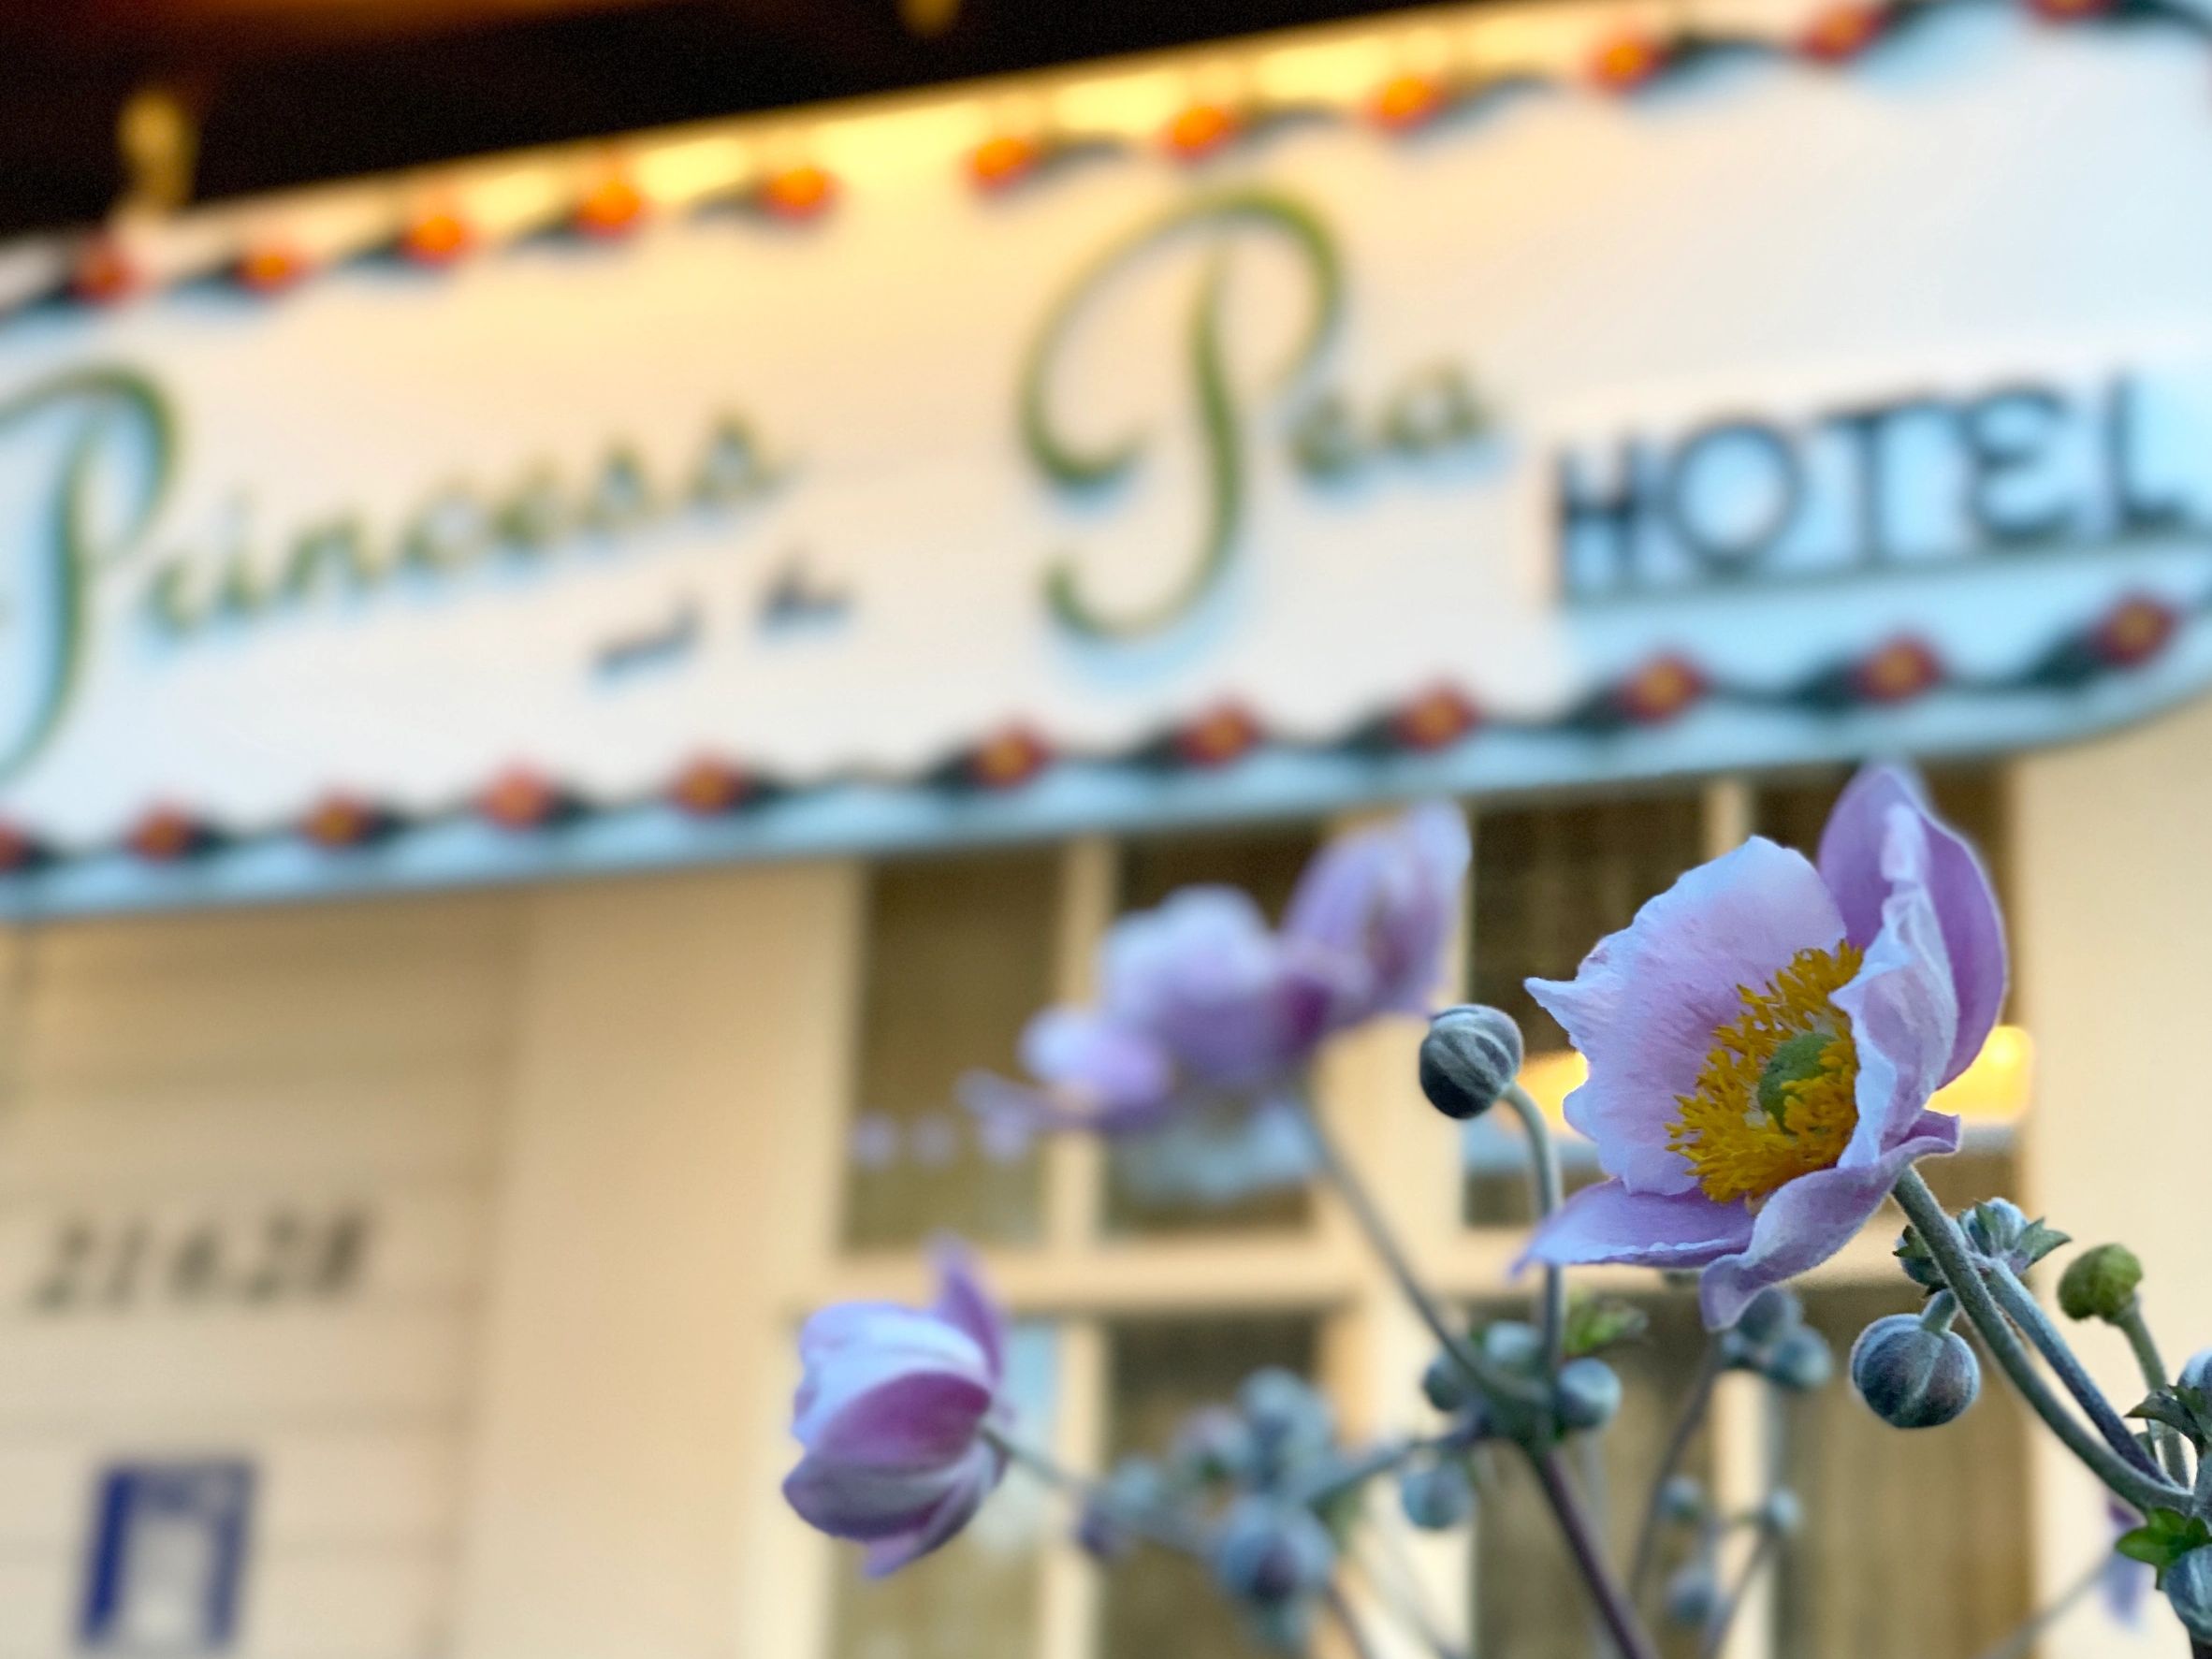 Princess and the Pea Hotel Signage with flowers in the foreground